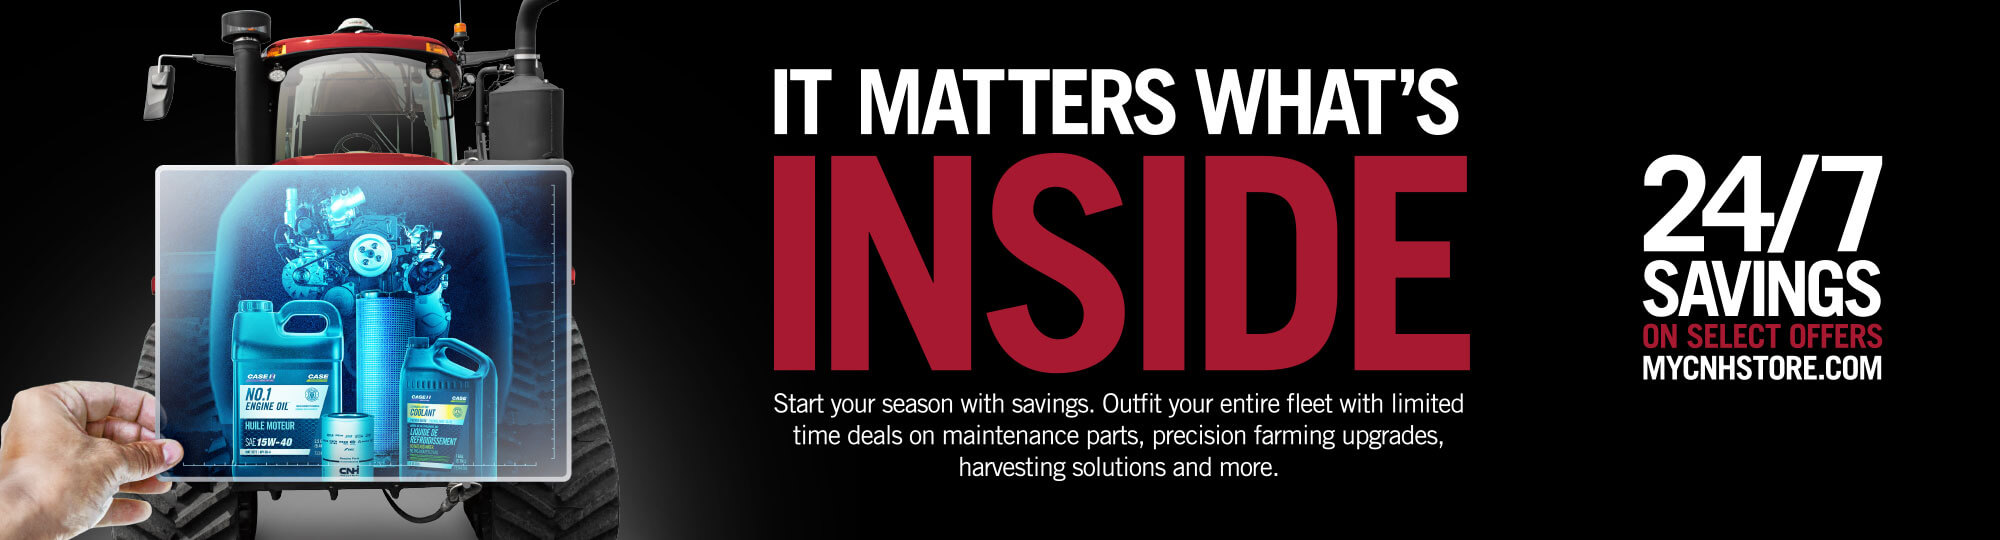 IT MATTERS WHAT'S INSIDE. Start your season with savings. Outfit your entire fleet with limited time deals on maintenance parts, precision farming upgrades, harvesting solutions and more.